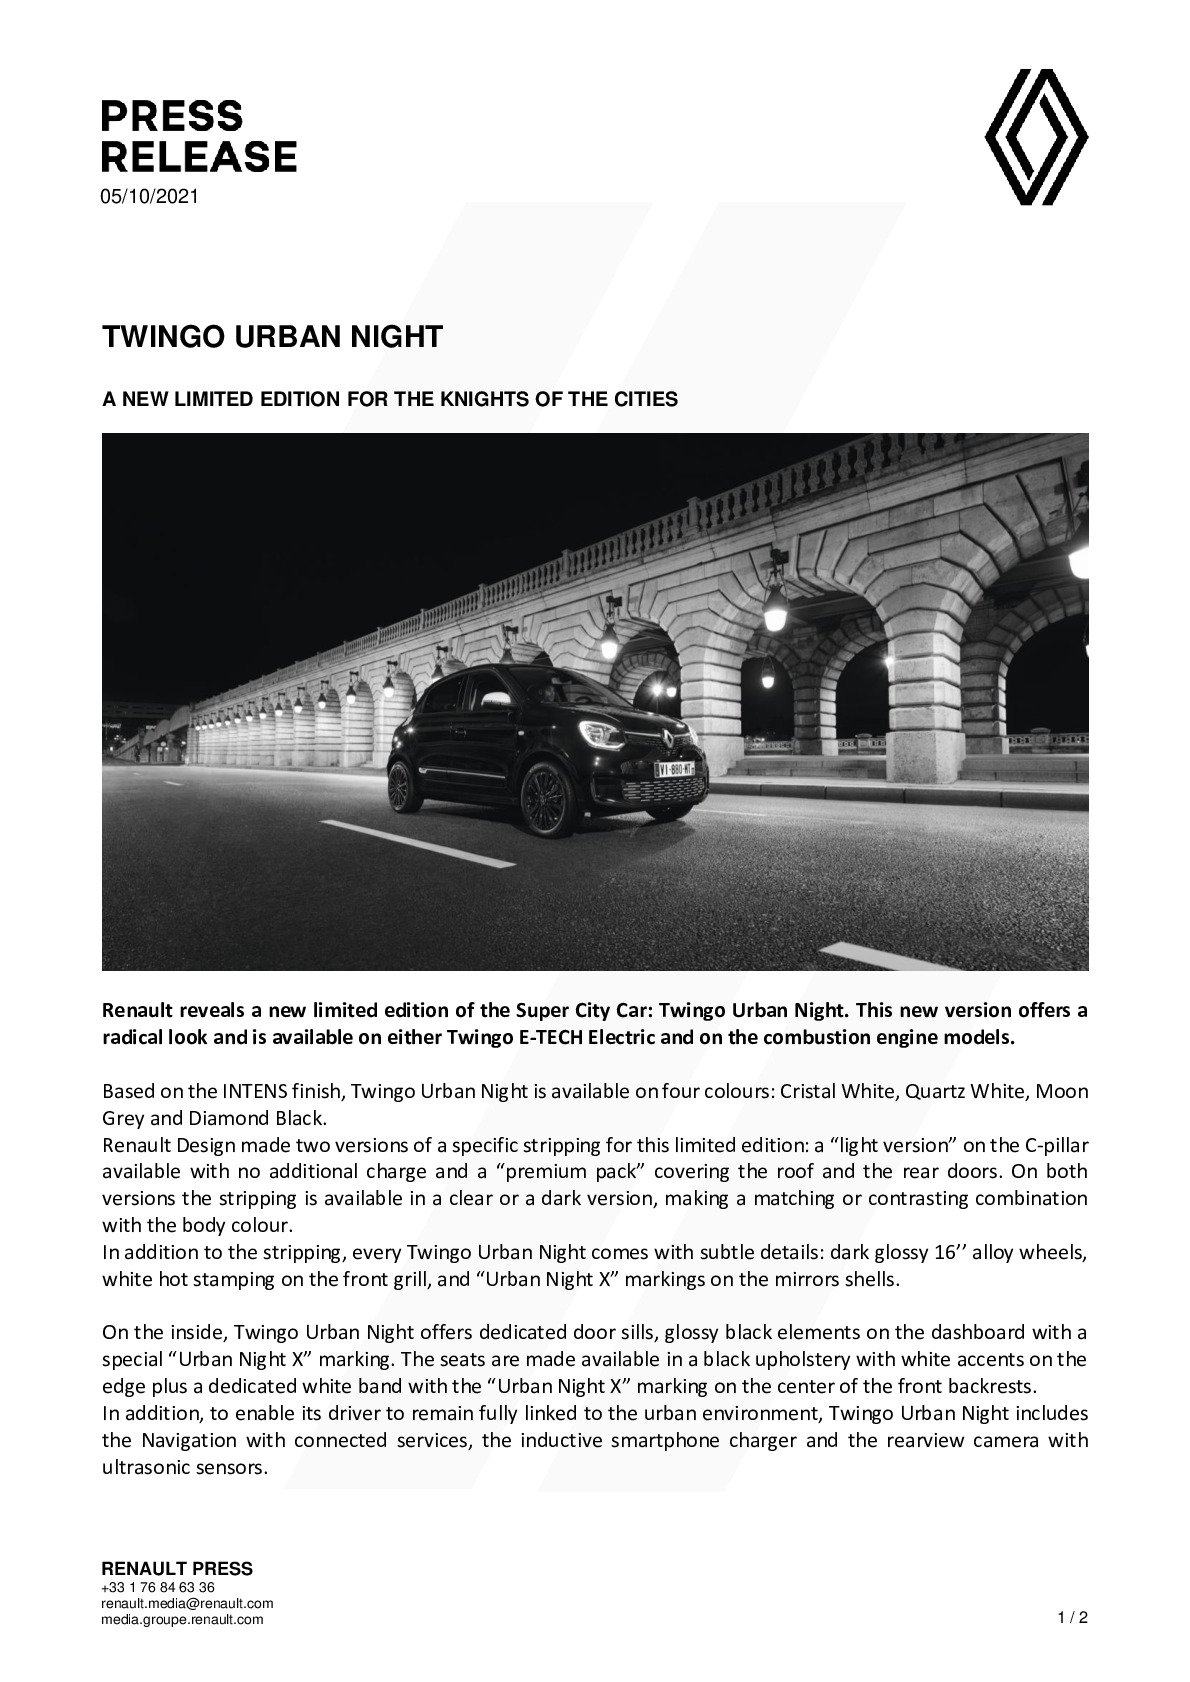 Twingo Urban Night: a new limited edition for the knights of the cities - Site  media global de Renault